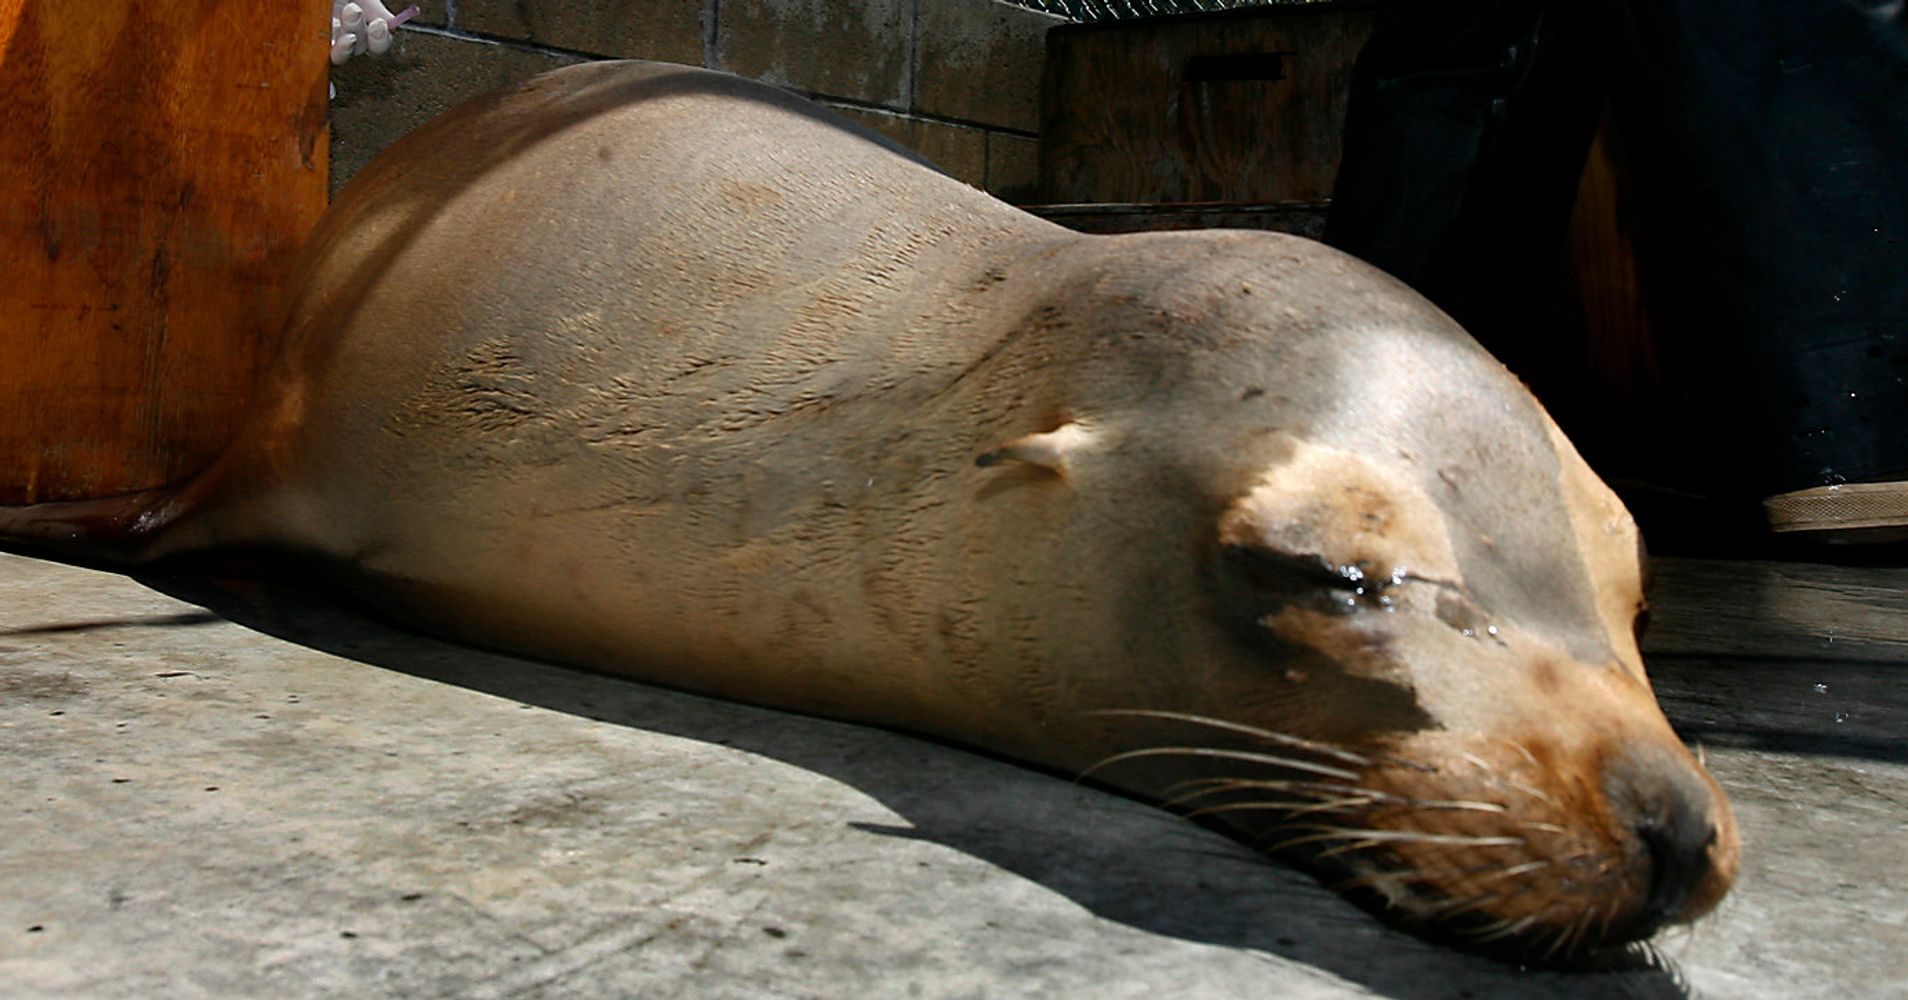 Sea Lions In California Are Dying From A Toxic Algae That Ravages Their